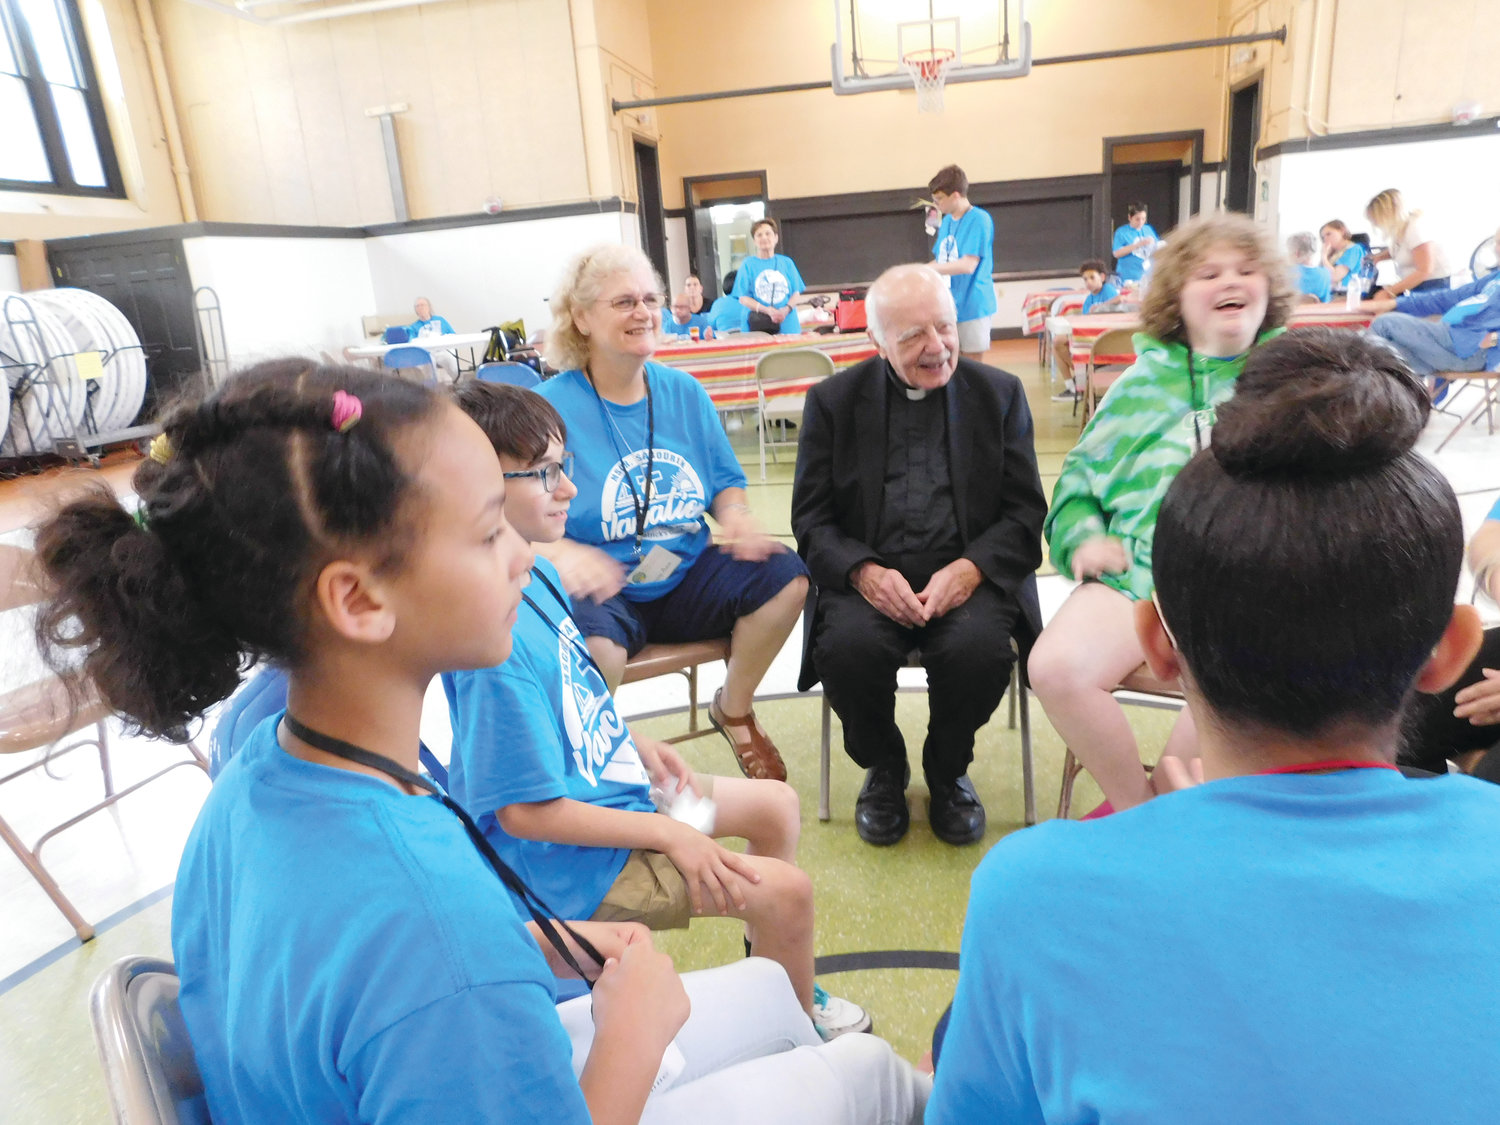 The camp’s namesake, Msgr. Gerard Sabourin, smiles with attendees during a recent visit to the camp. In the 1960’s, Msgr. Sabourin established the Office of the Apostolate for the Handicapped, the precursor to the Office of the Apostolate for People with Disabilities.